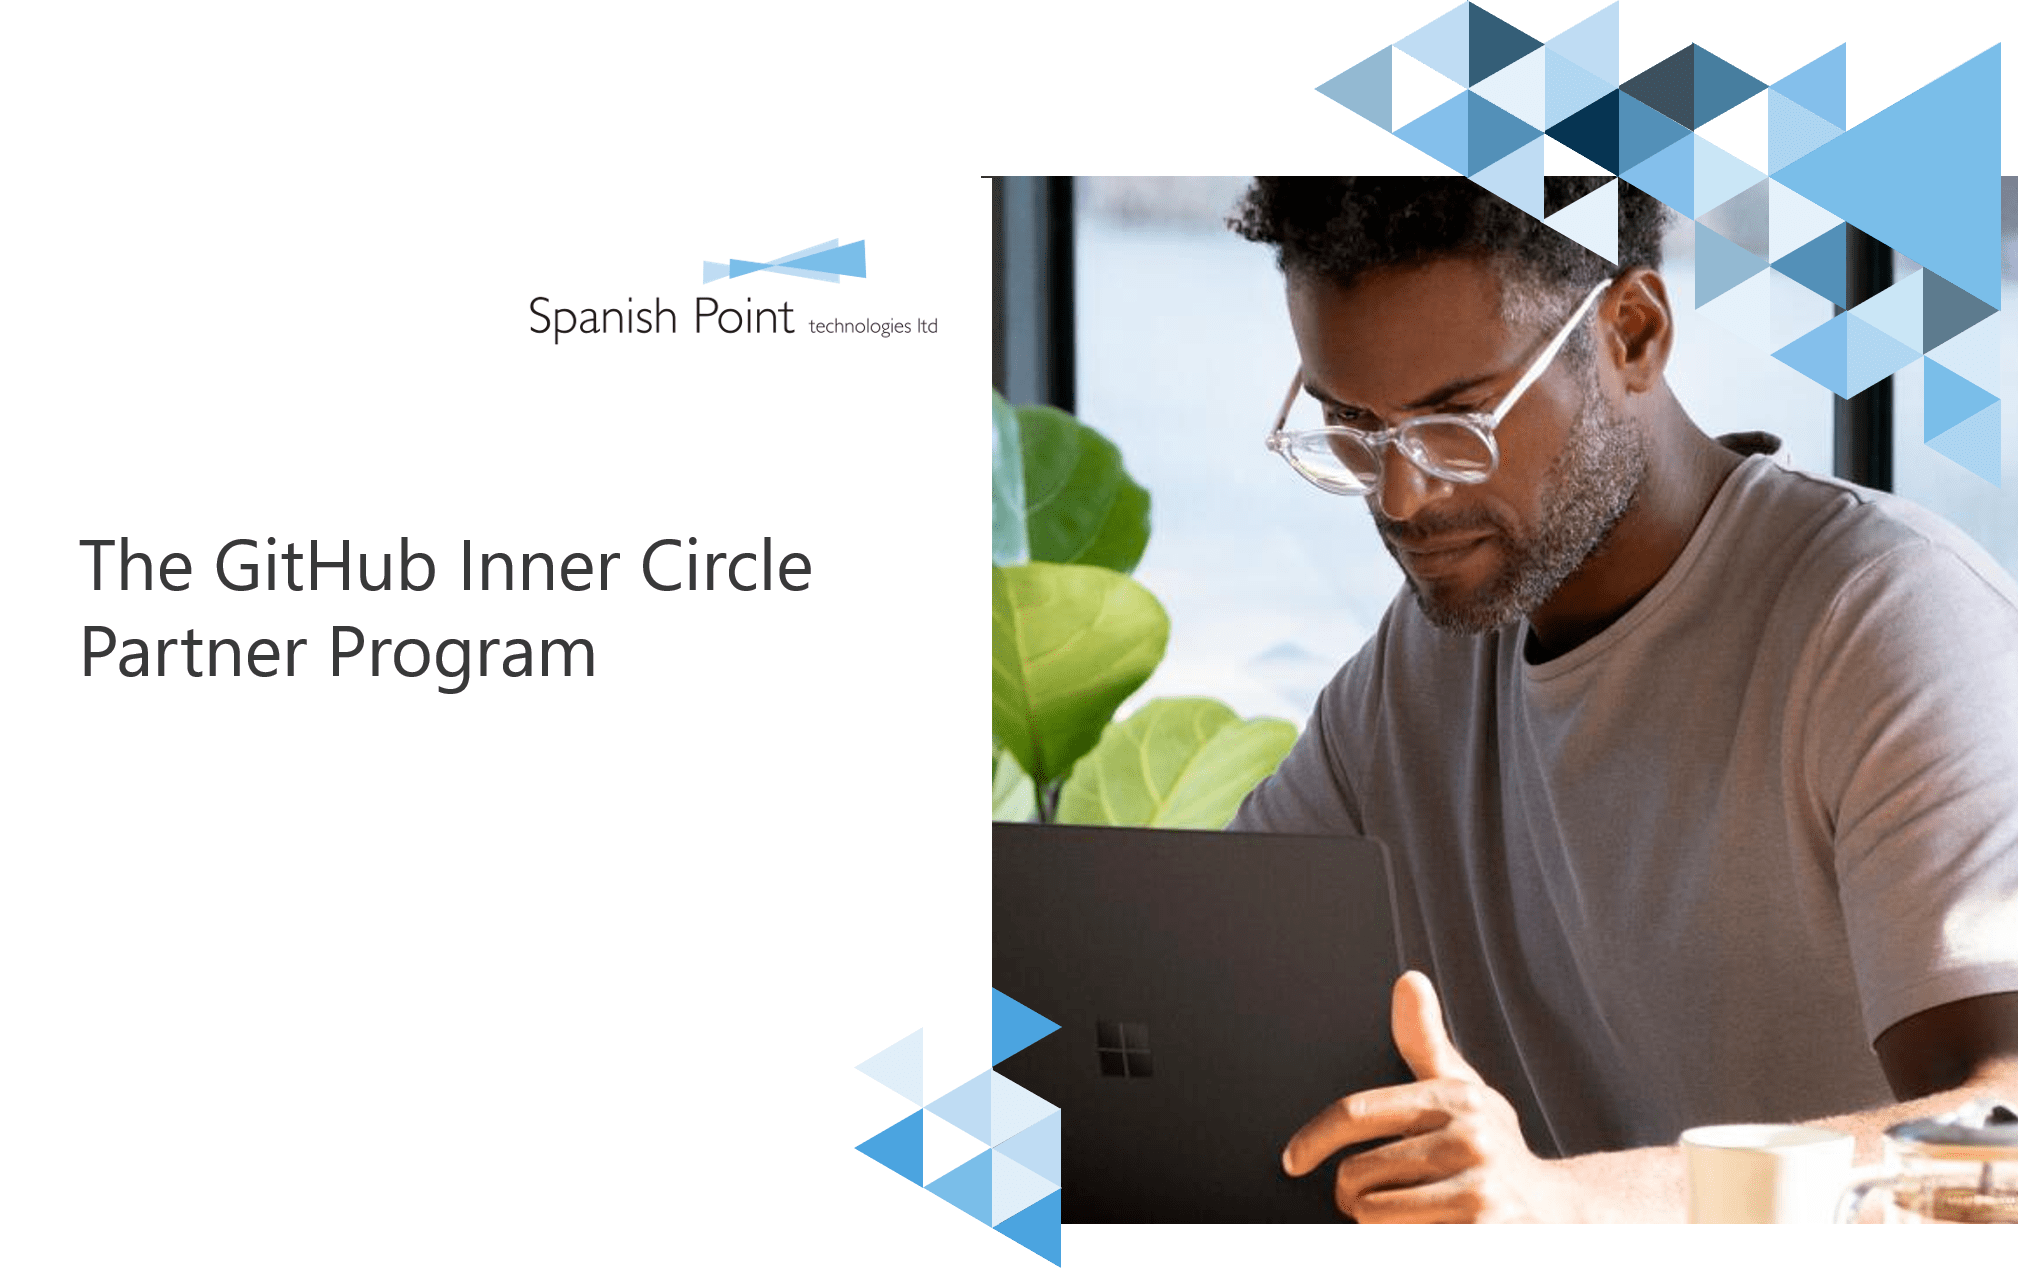 Spanish Point are one of only 74 partners worldwide selected for The GitHub Inner Circle Partner program